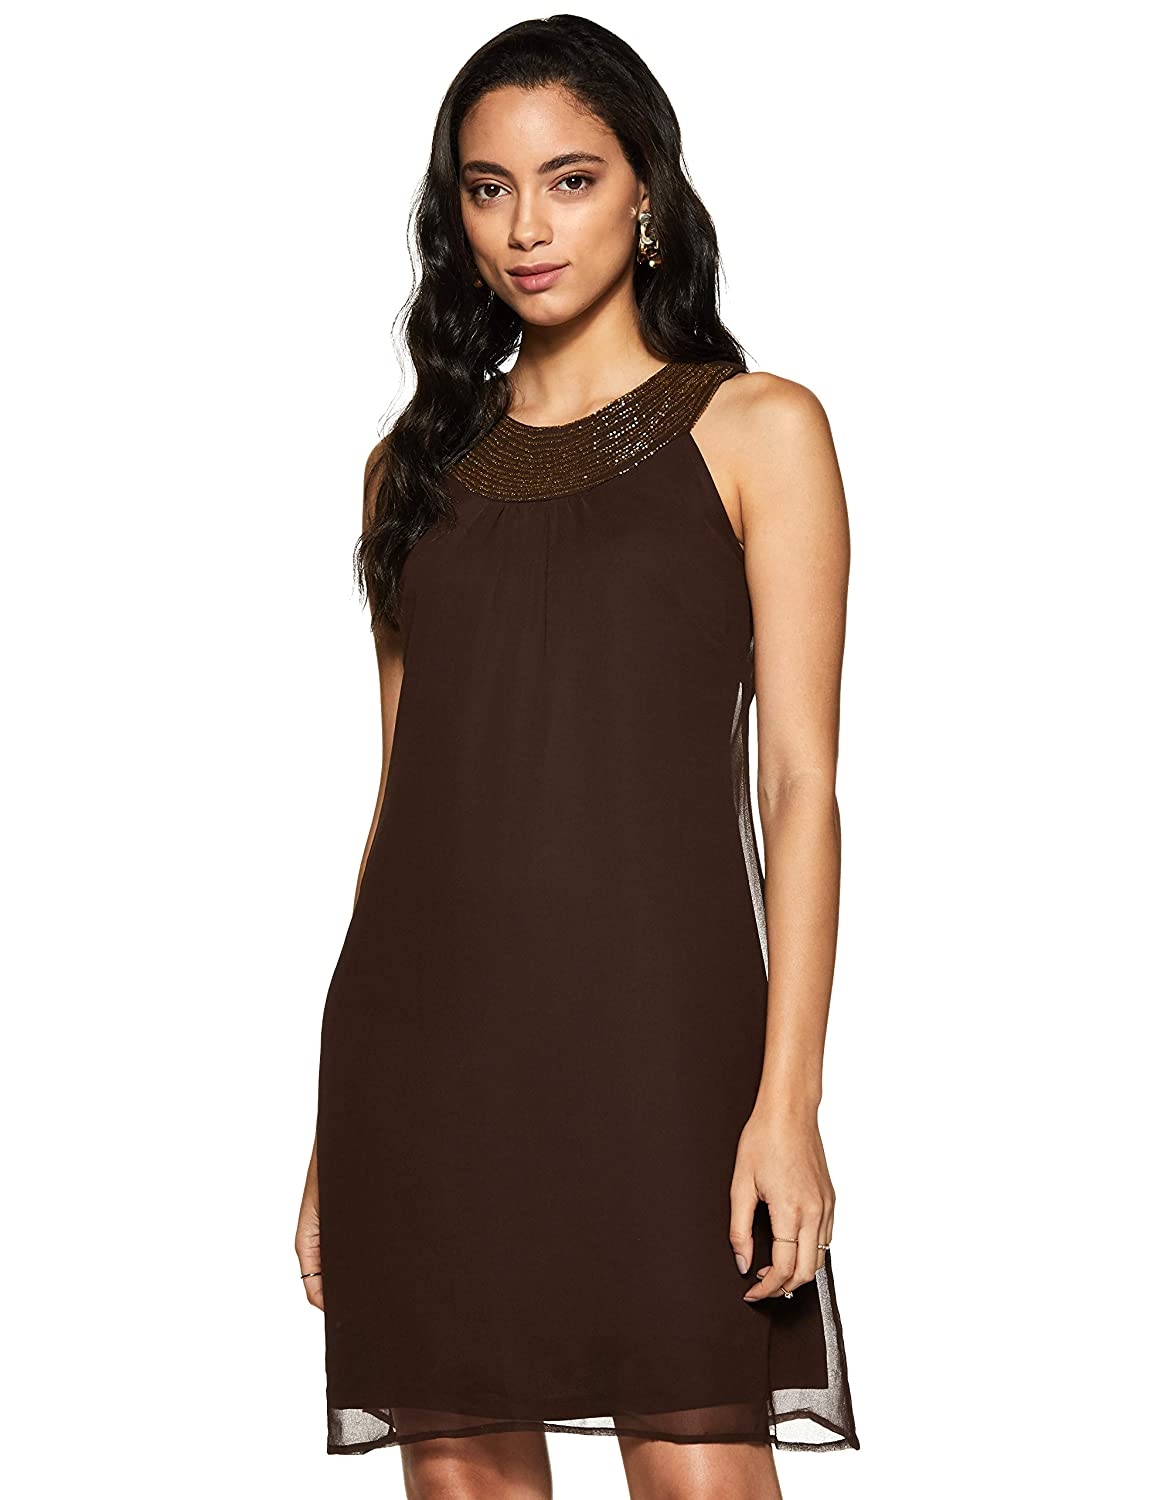 LY2 | LY2 Brown Polyester Embellished Mini Dress  0